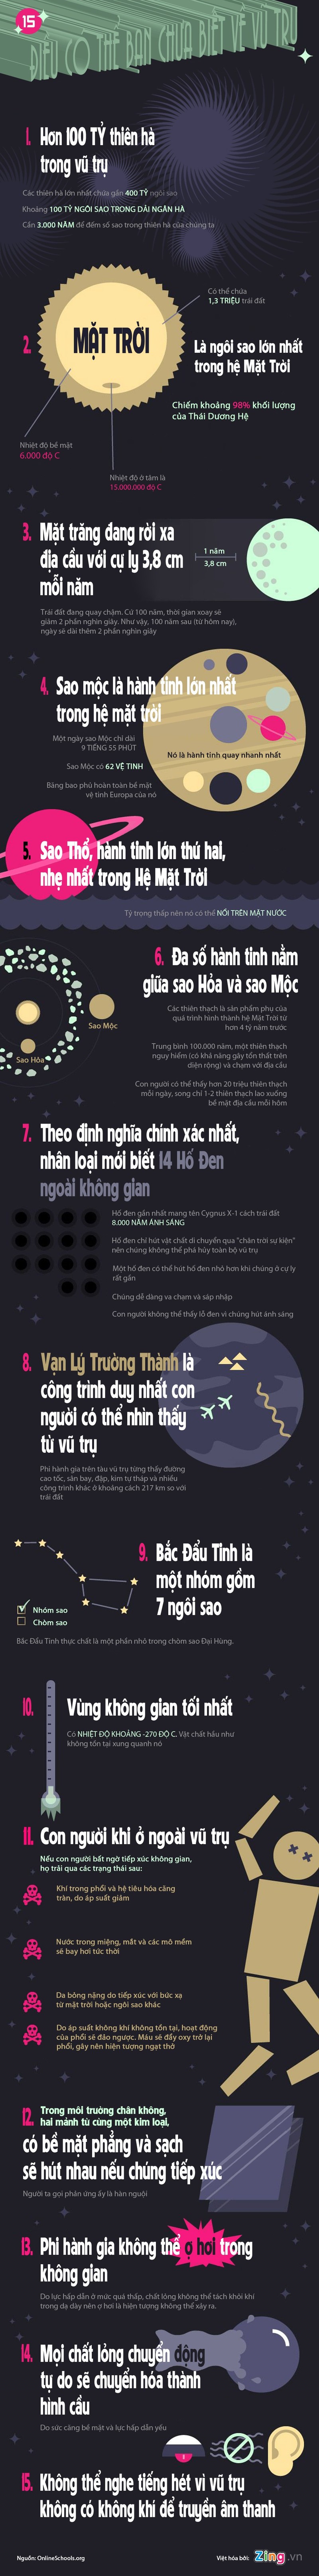 Infographic: Su that gay soc ve cuoc song ngoai Trai dat